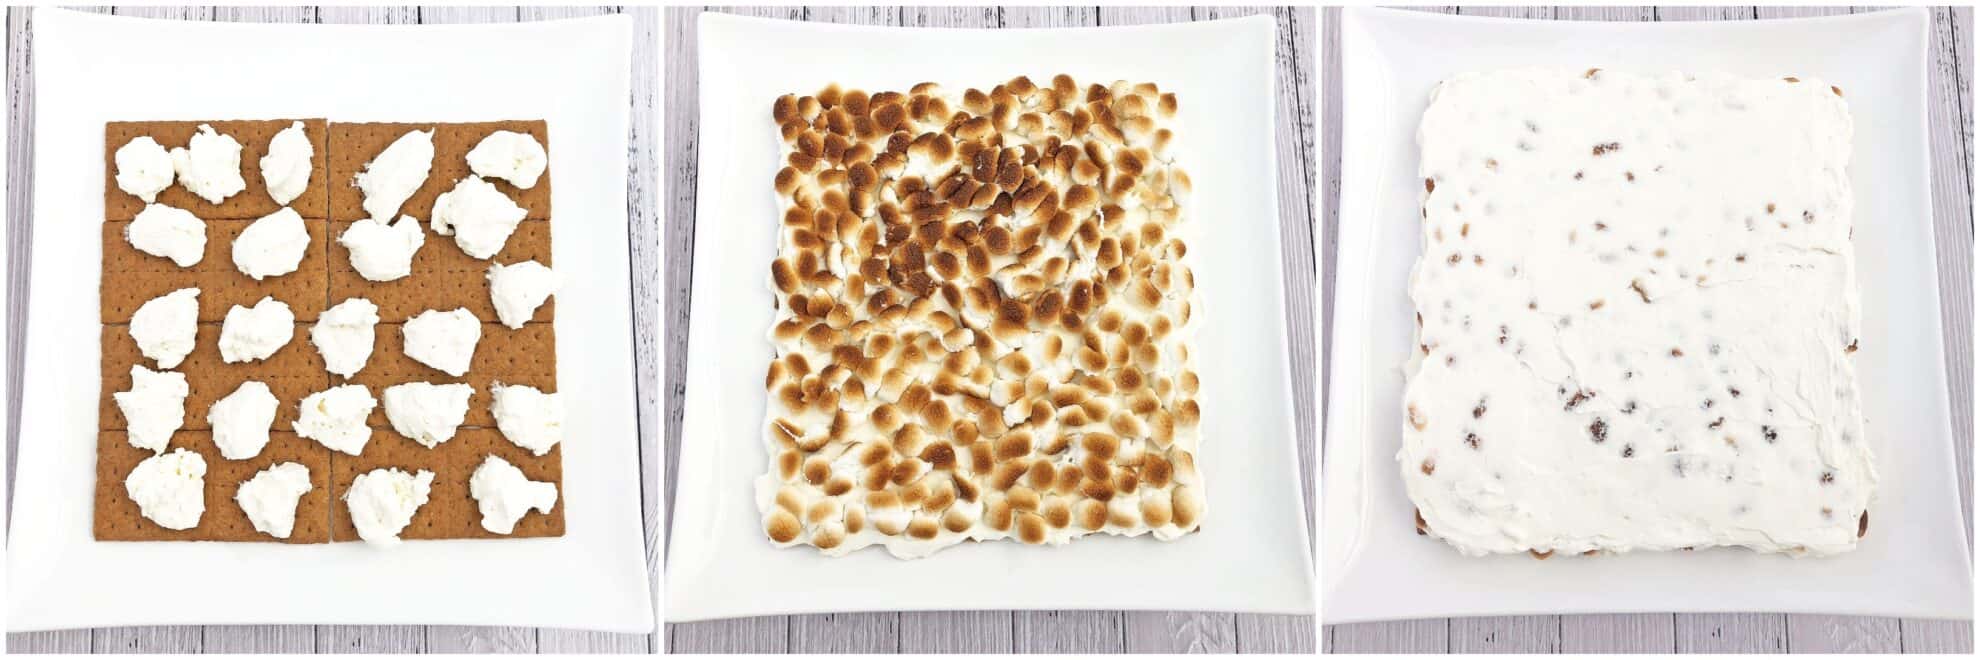 Peel toasted and cooled marshmallows off the parchment paper and place them on top of the cream.